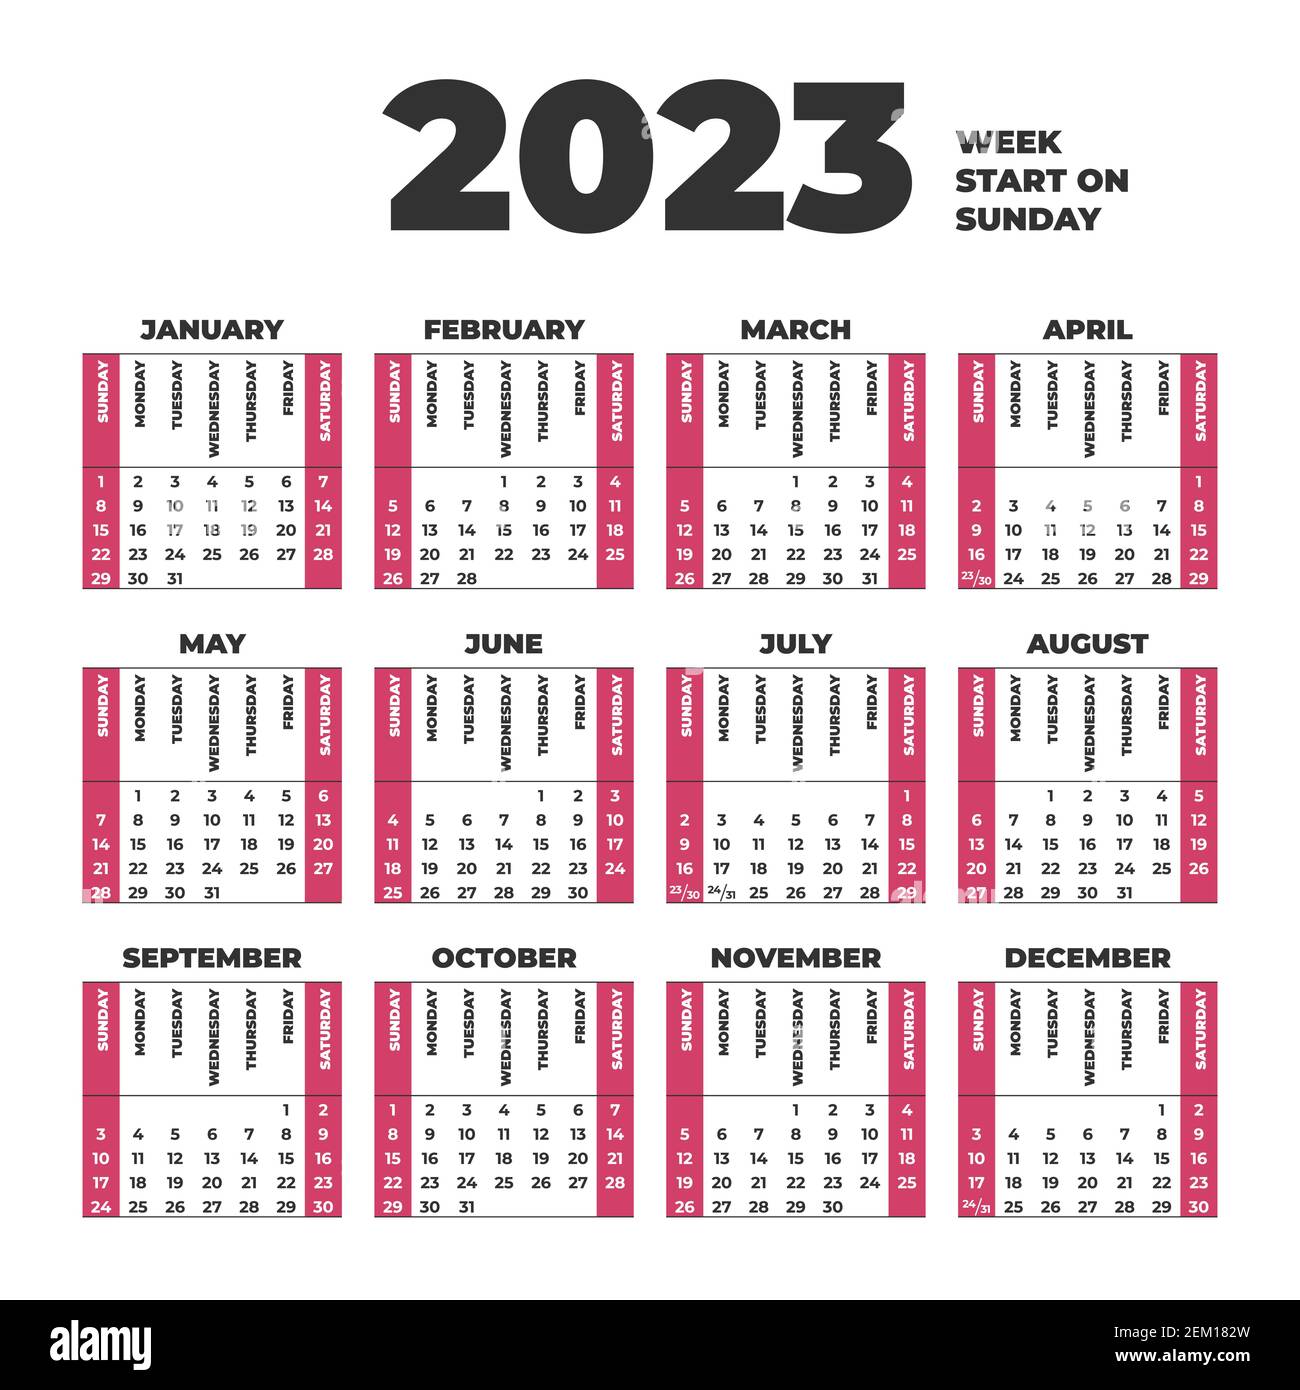 2023-calendar-template-with-weeks-start-on-sunday-stock-vector-image